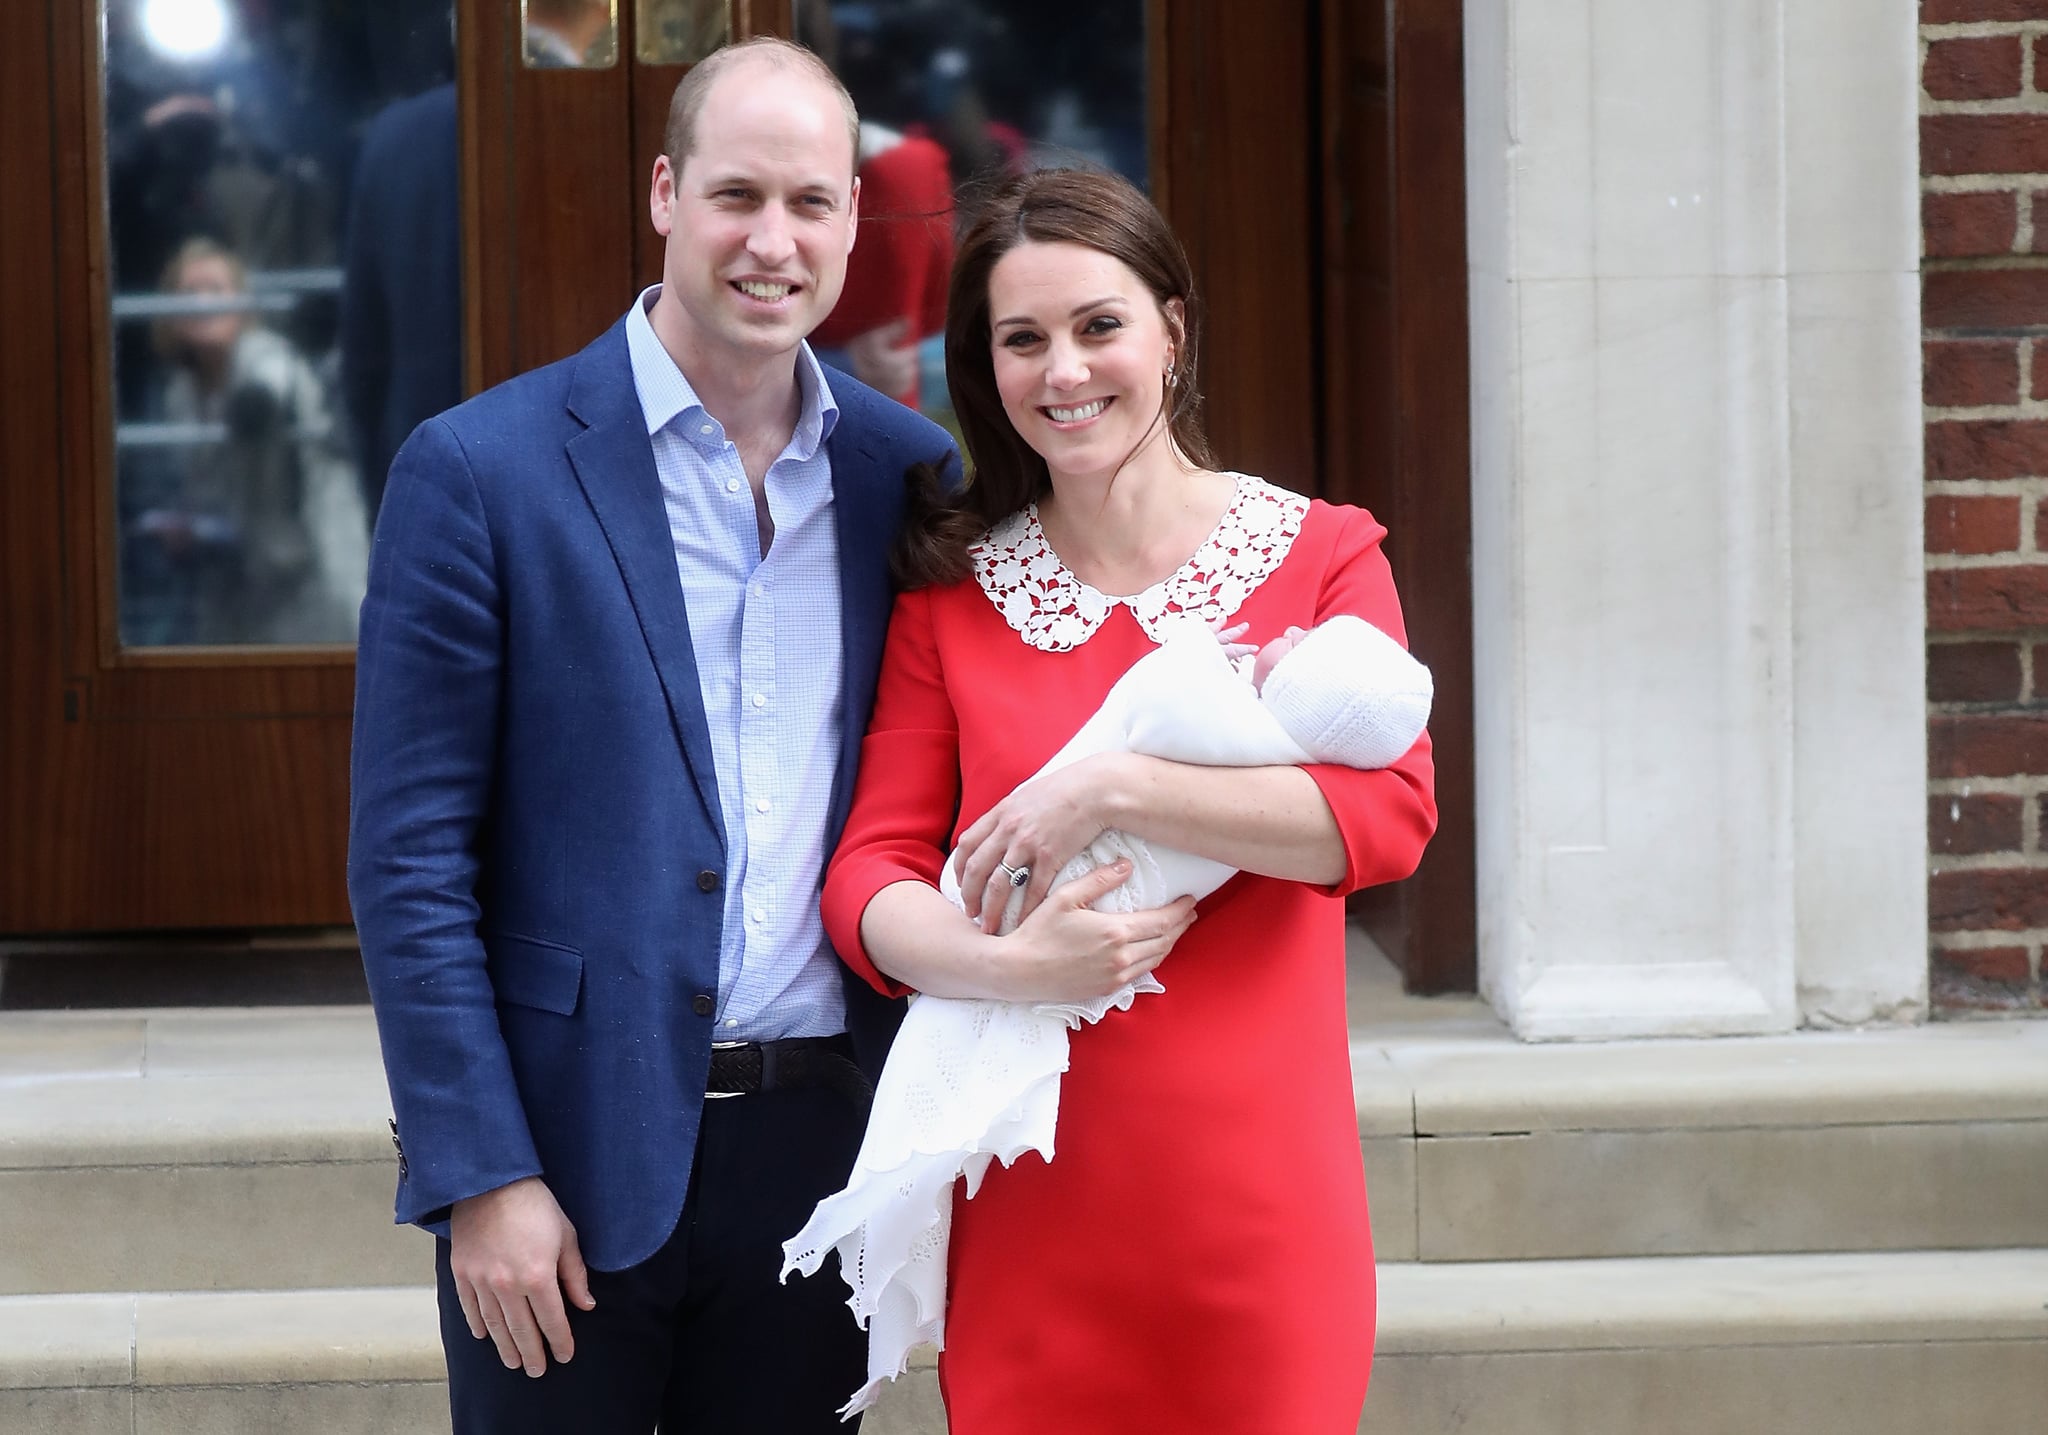 LONDON, ENGLAND - APRIL 23:  Prince William, Duke of Cambridge and Catherine, Duchess of Cambridge depart the Lindo Wing with their new born son Prince Louis of Cambridge at St Mary's Hospital on April 23, 2018 in London, England. The Duchess safely delivered a boy at 11:01 am, weighing 8lbs 7oz, who will be fifth in line to the throne.  (Photo by Chris Jackson/Getty Images)